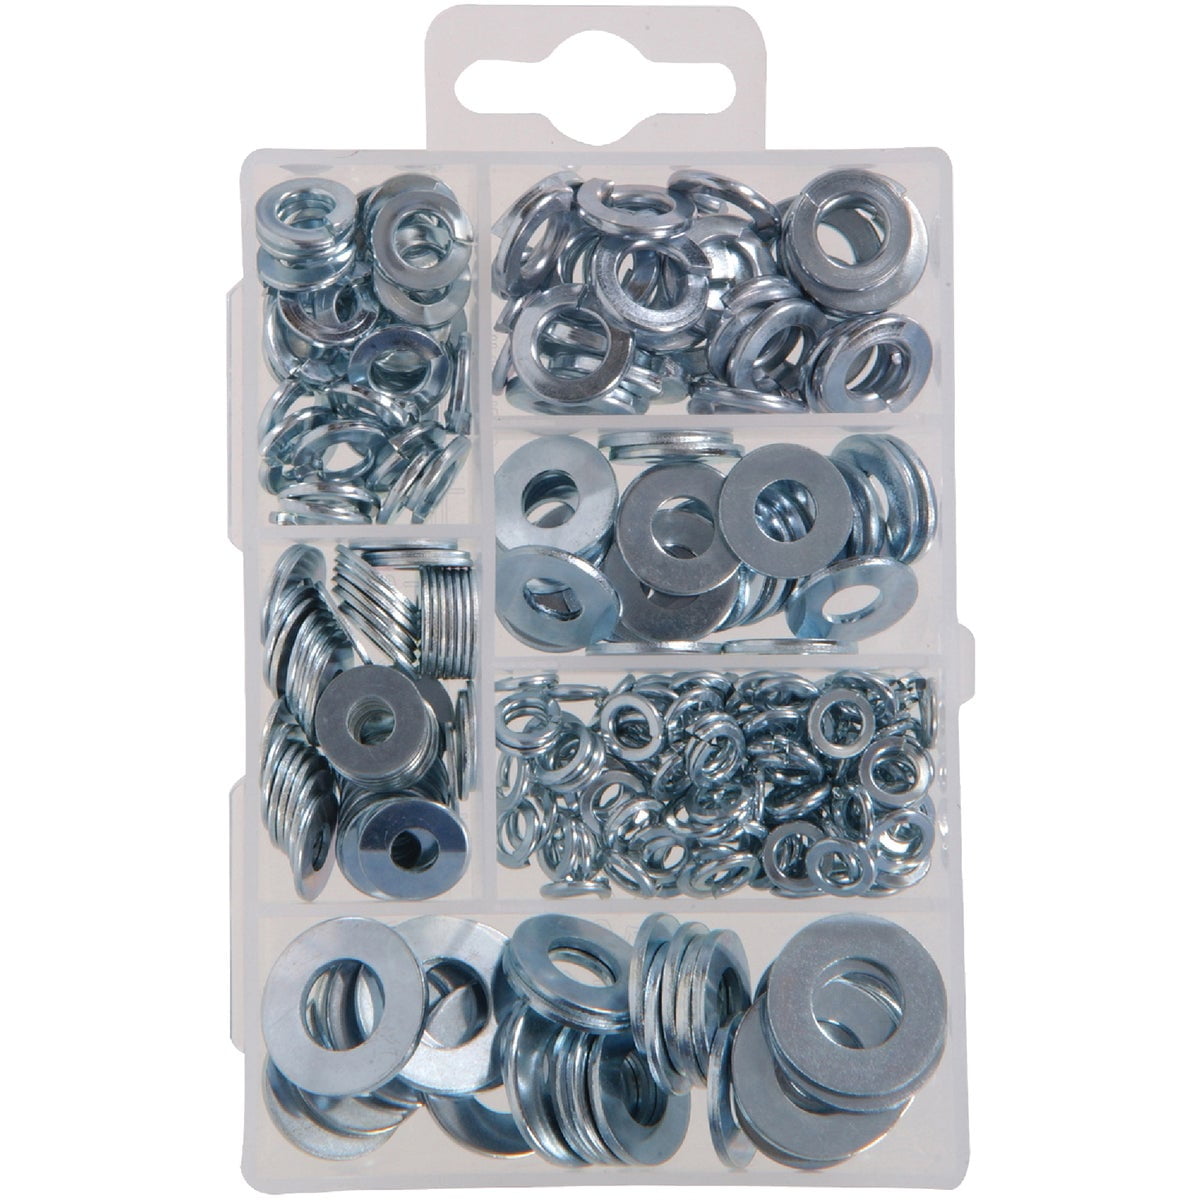 The Hillman Group 830548 Stainless Steel Number 2 Flat Washer 100-Pack 